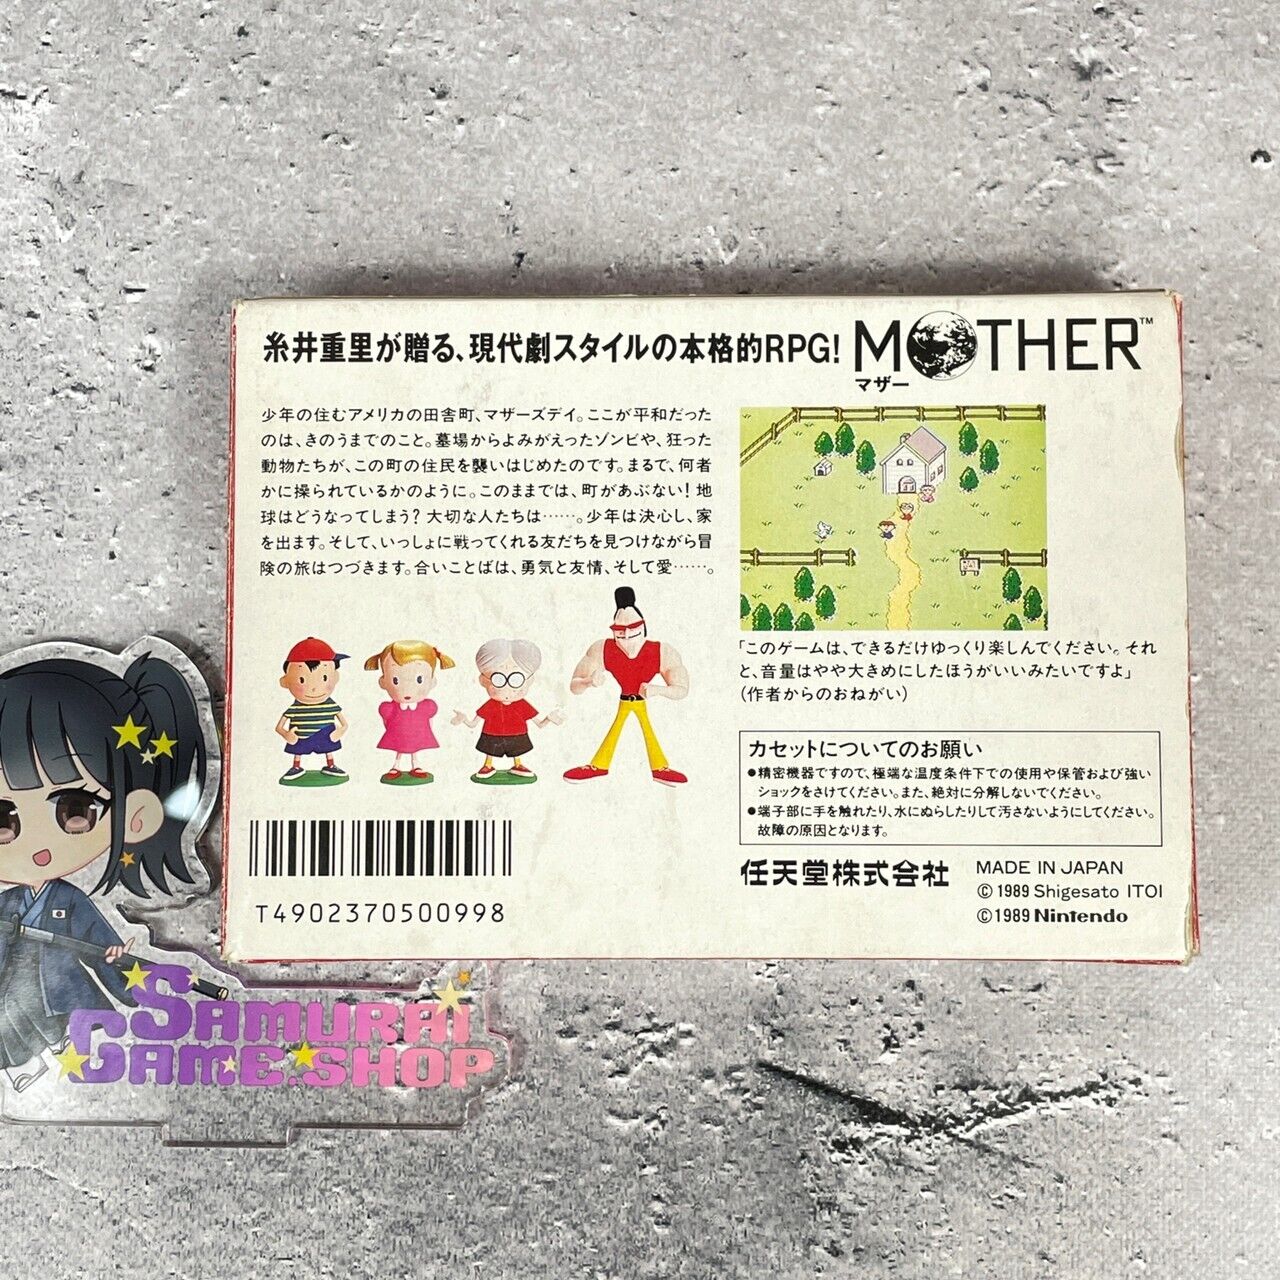 FC MOTHER Famicom Cartridge ONLY or BOX Family Computer Vintage Japanese ver.